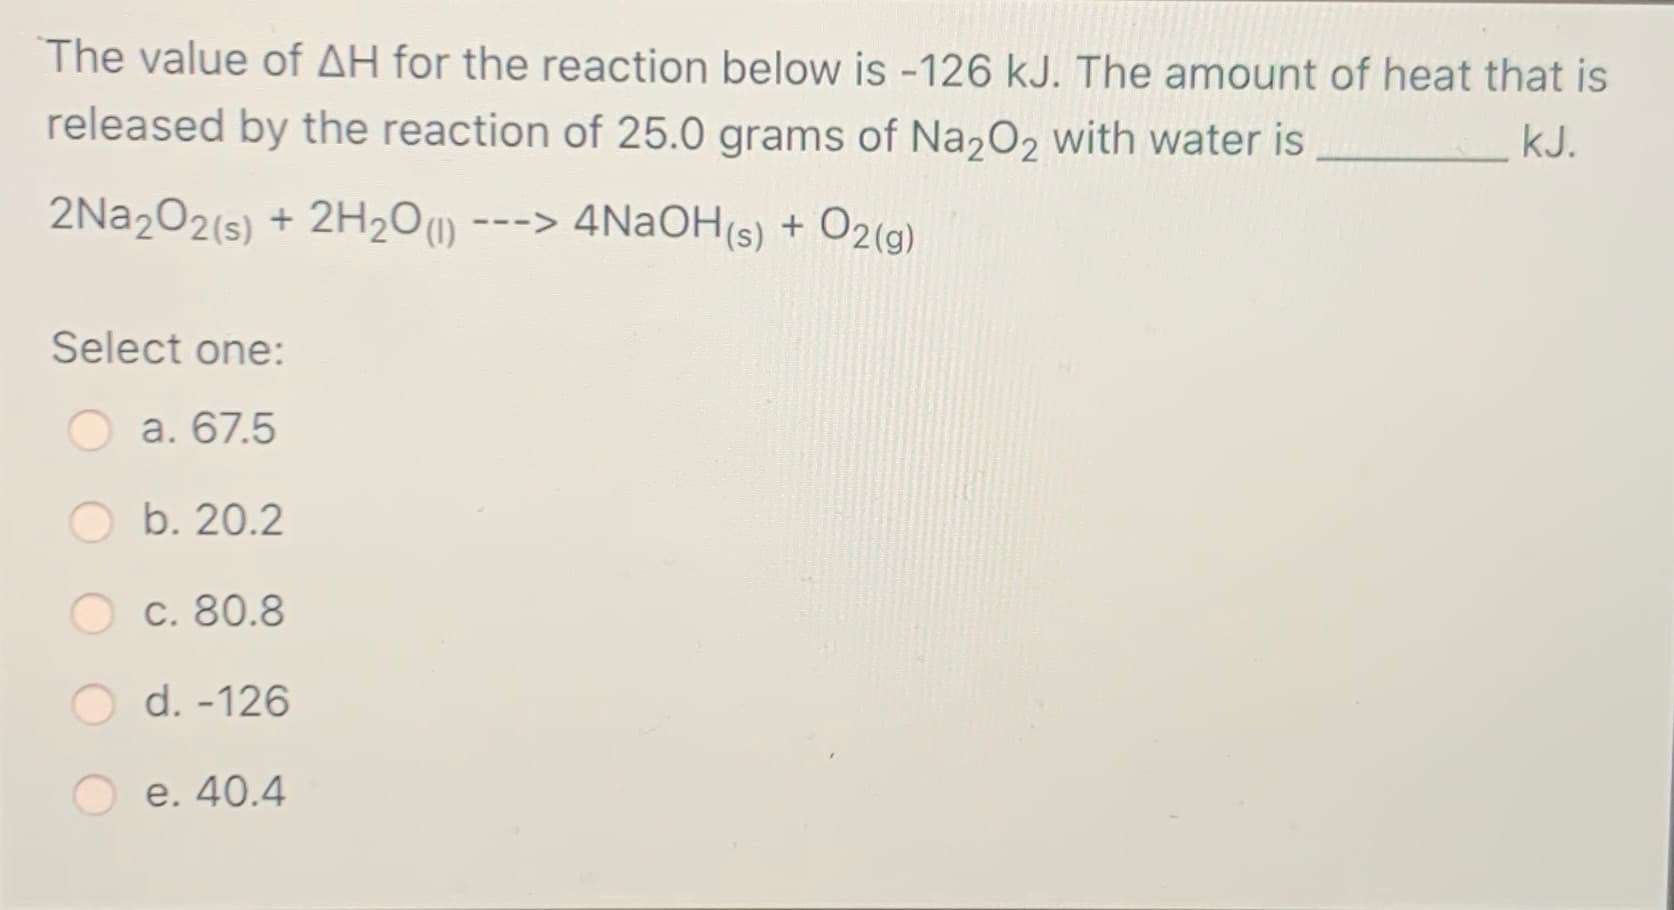 The value of AH for the reaction below is -126 kJ. The amount of heat that is
released by the reaction of 25.0 grams of Na2O2 with water is
kJ.
2NA2O2(s) + 2H2O1)
---> 4N2OH(s) + O2(g)
Select one:
a. 67.5
b. 20.2
c. 80.8
O d. -126
e. 40.4
